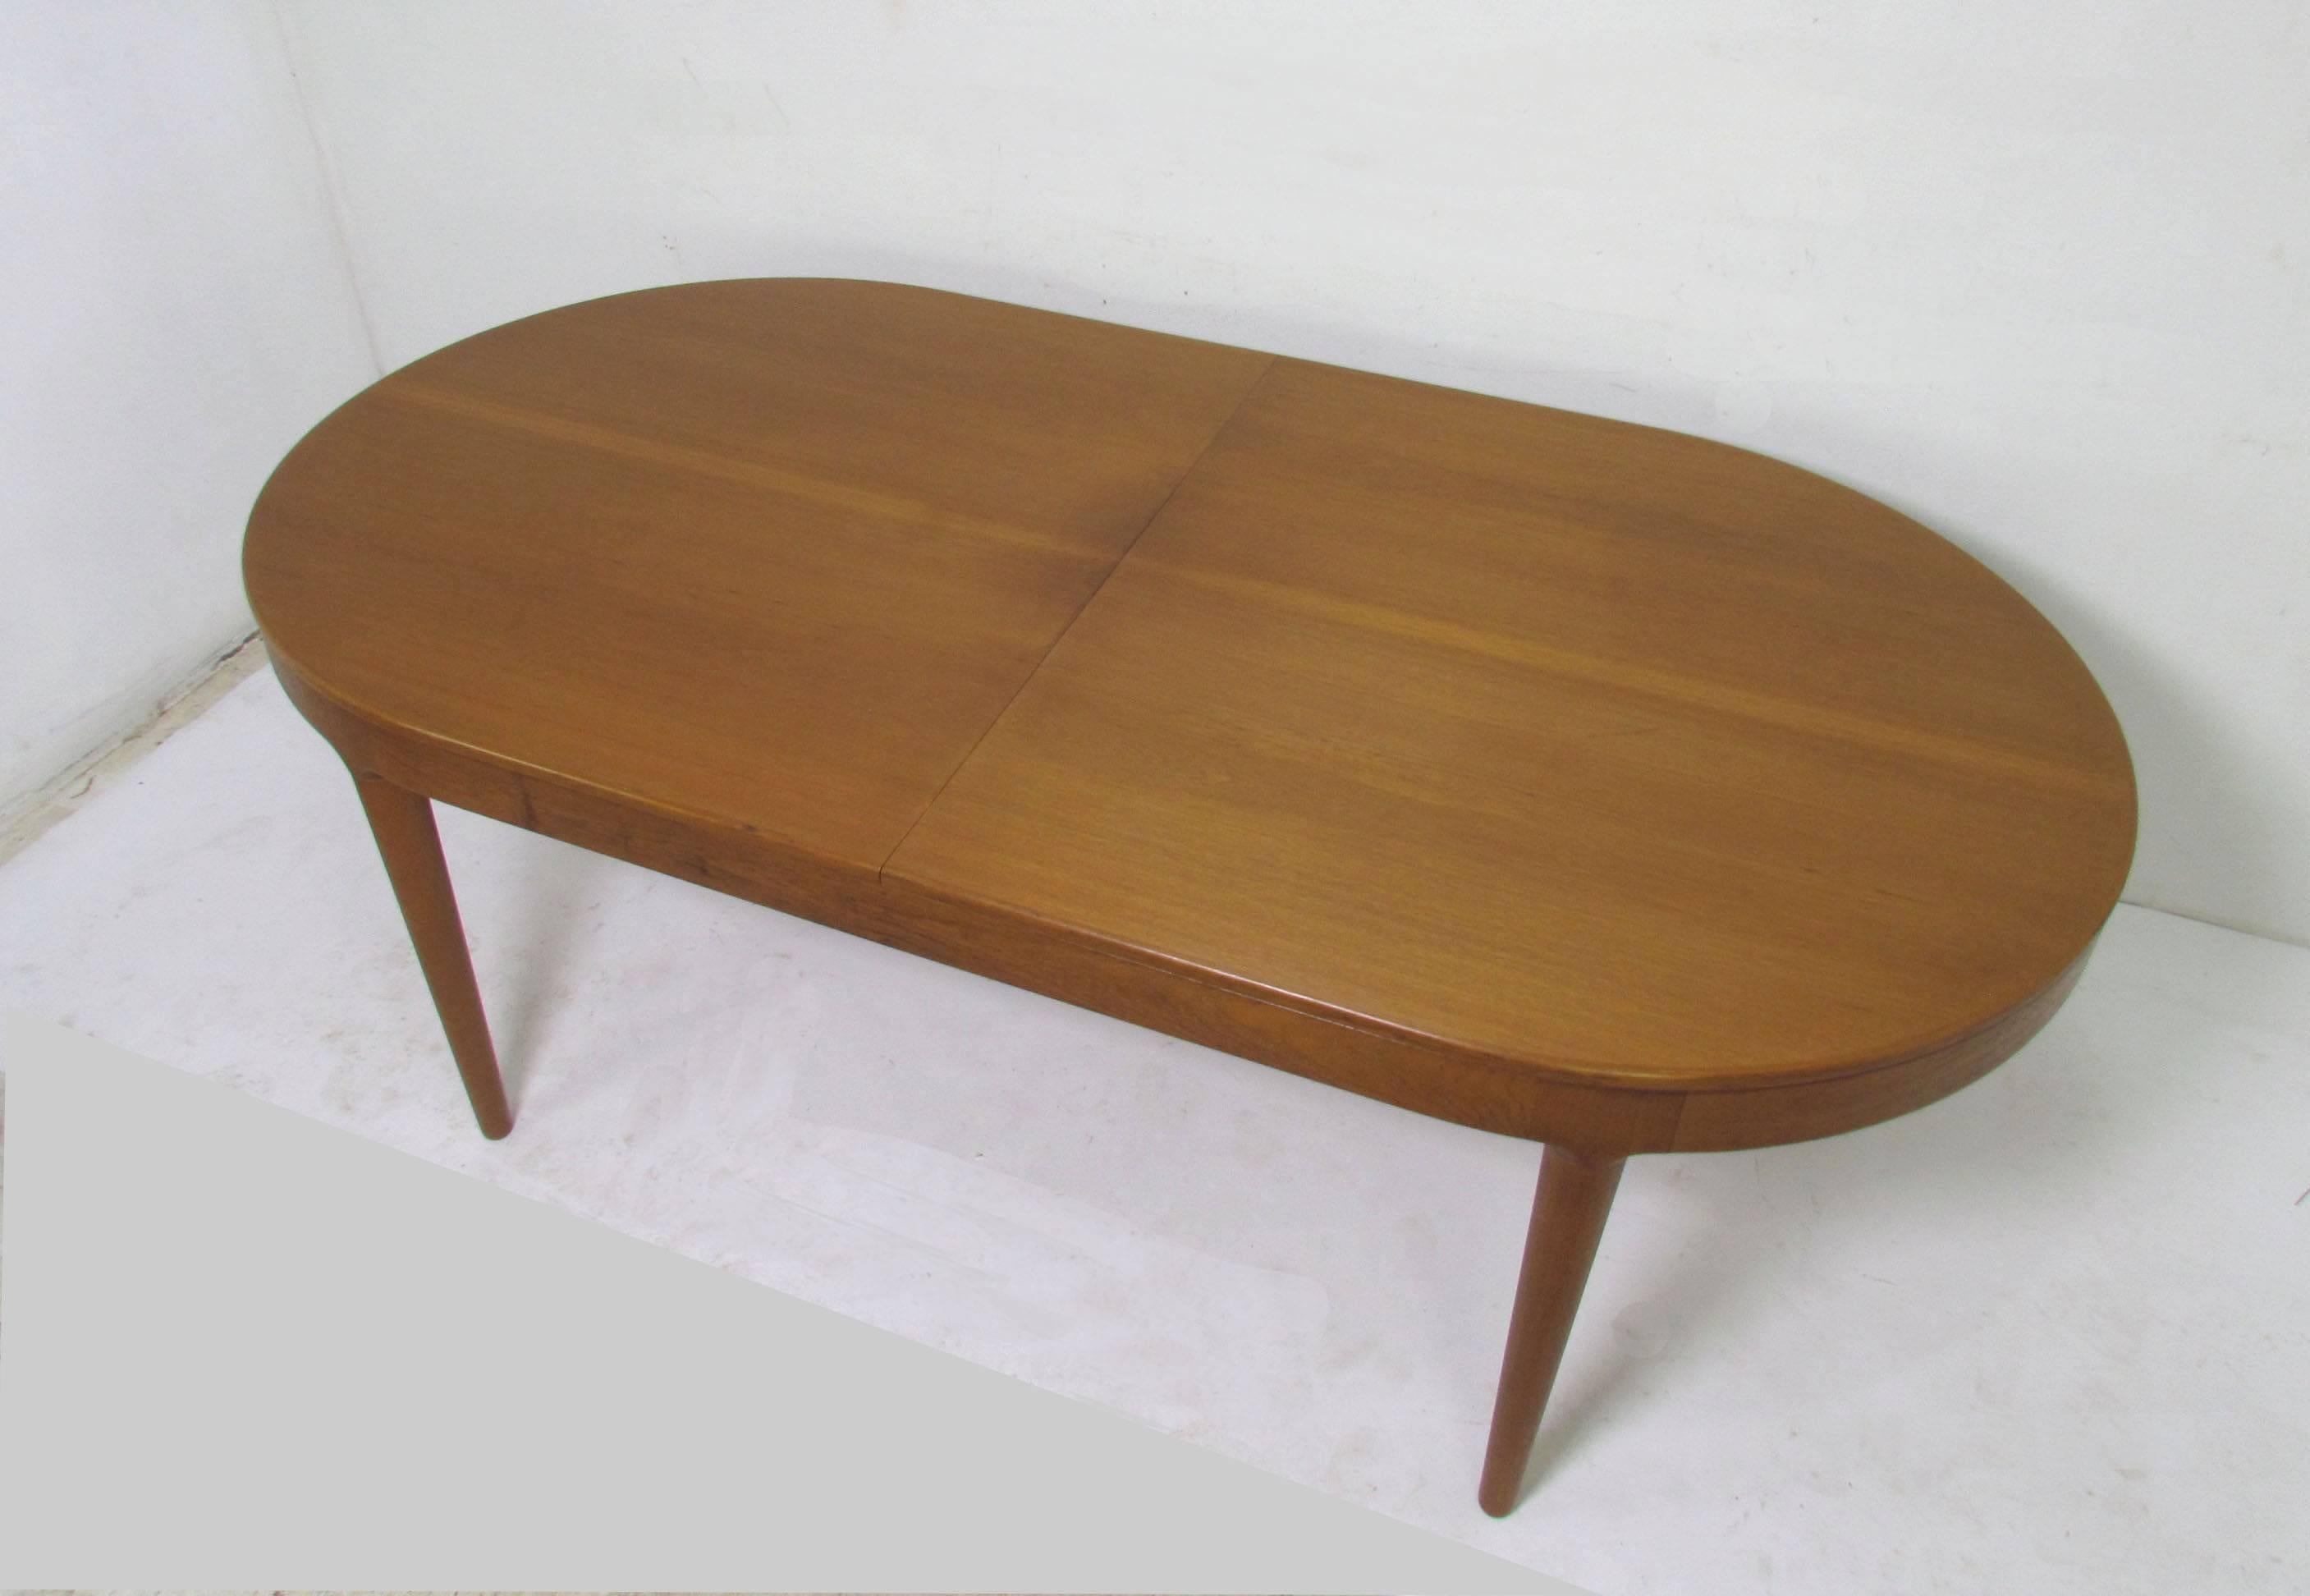 Attractive wide-skirted Danish teak oval dining table with two butterfly extension leaves, designed by Arne Hovmand-Olsen for Mogens Kold, circa 1960s.

Each leave is 19.5